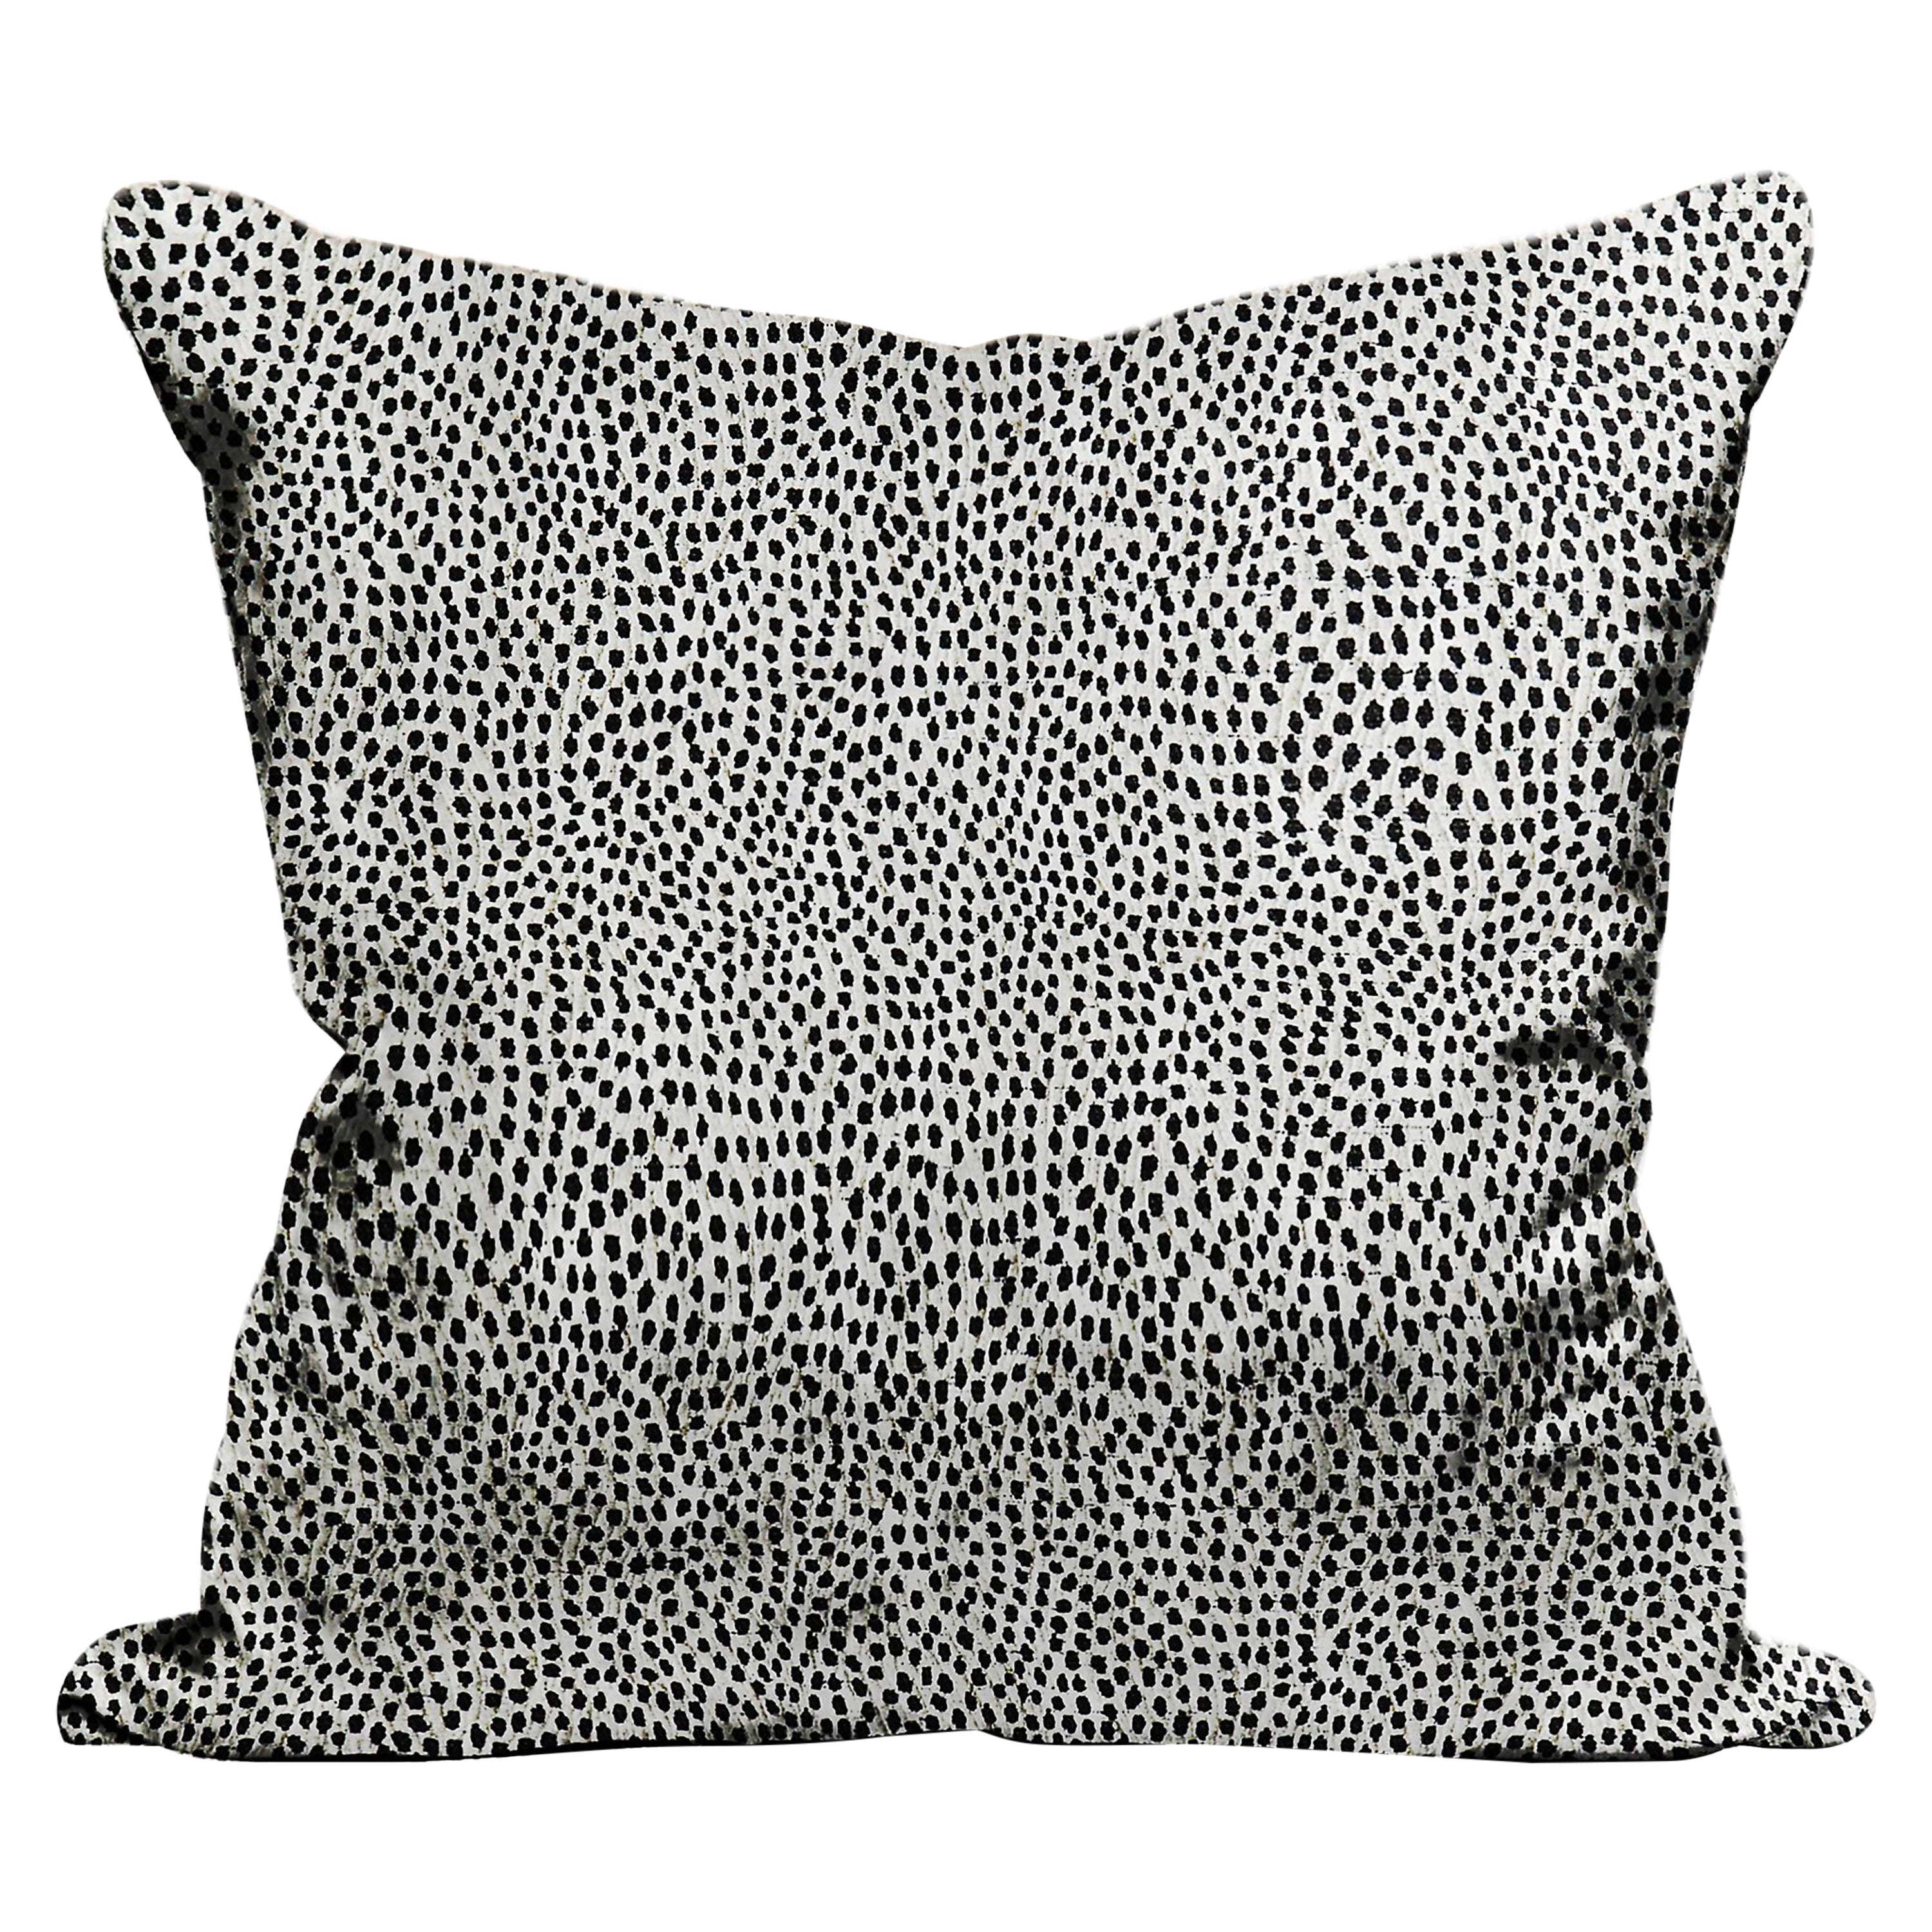 Flurry Pillow For Sale